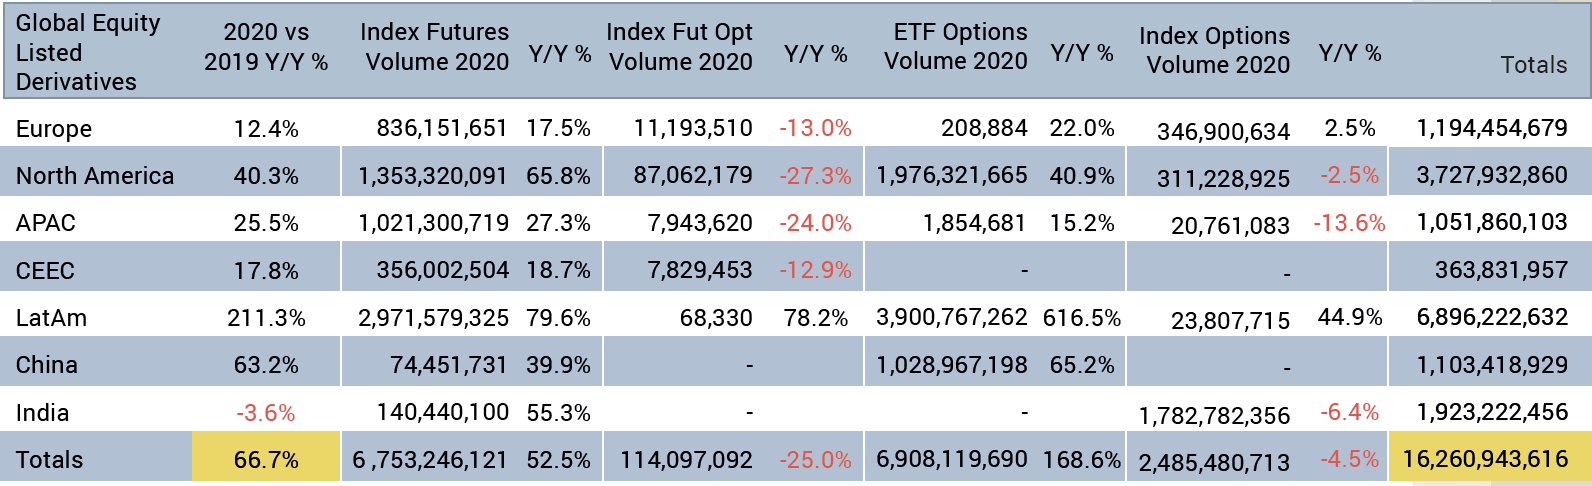 Index futures and ETF options drive growth